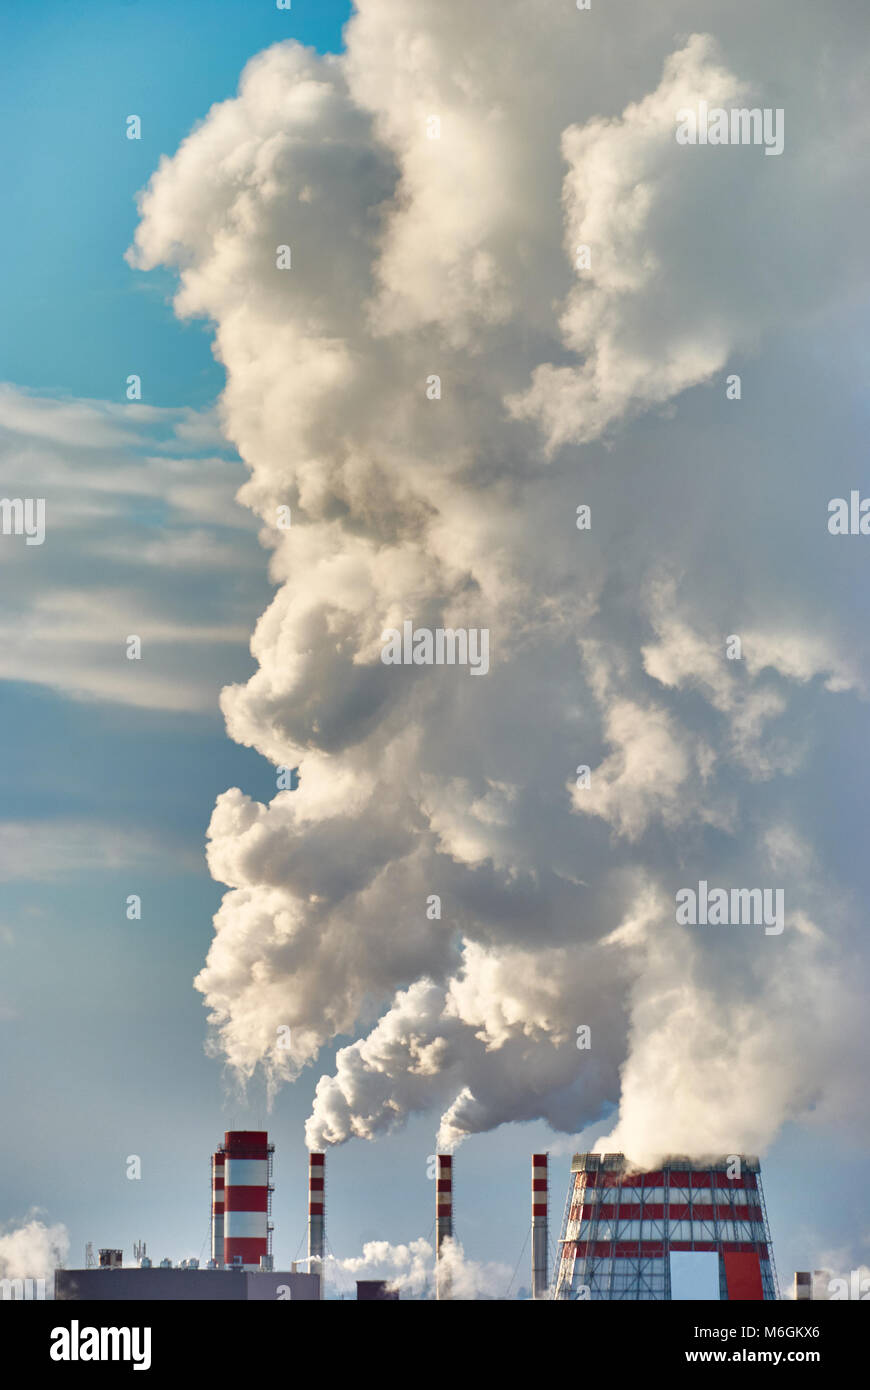 Dense steam escaping from a thermal power plant on a frosty day Stock Photo